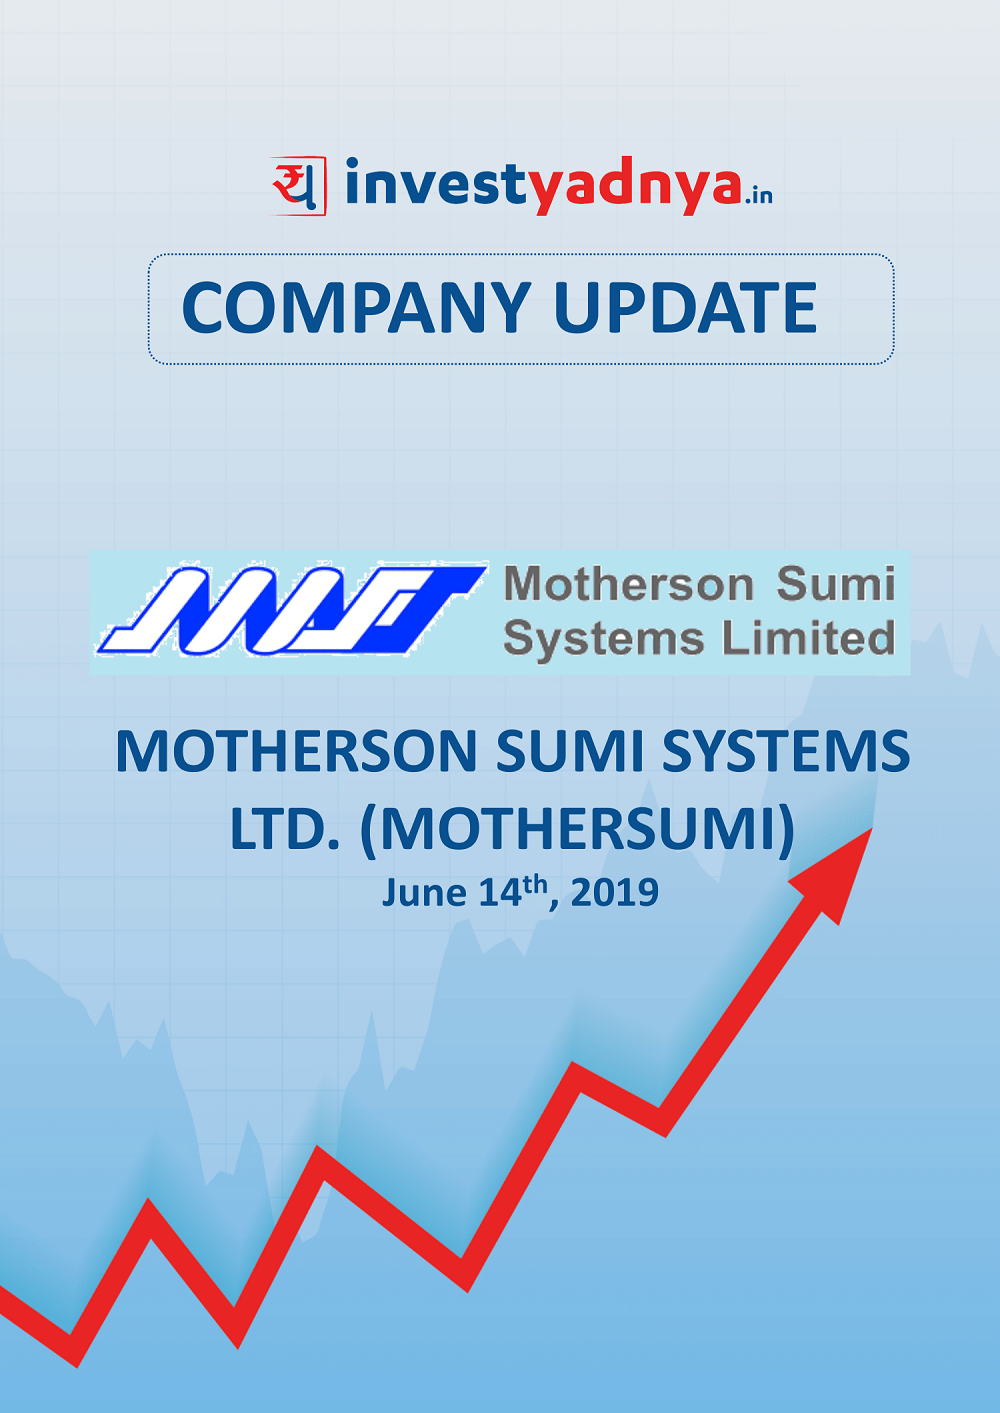 Learn in detail about the report of Motherson Sumi systems ltd in this eBook from Investyadna. Find information about the Company Update, SWOT Analysis etc. ✔ Indian Stock Market Analysis ✔ Detailed Company Reports ✔ Latest Reviews